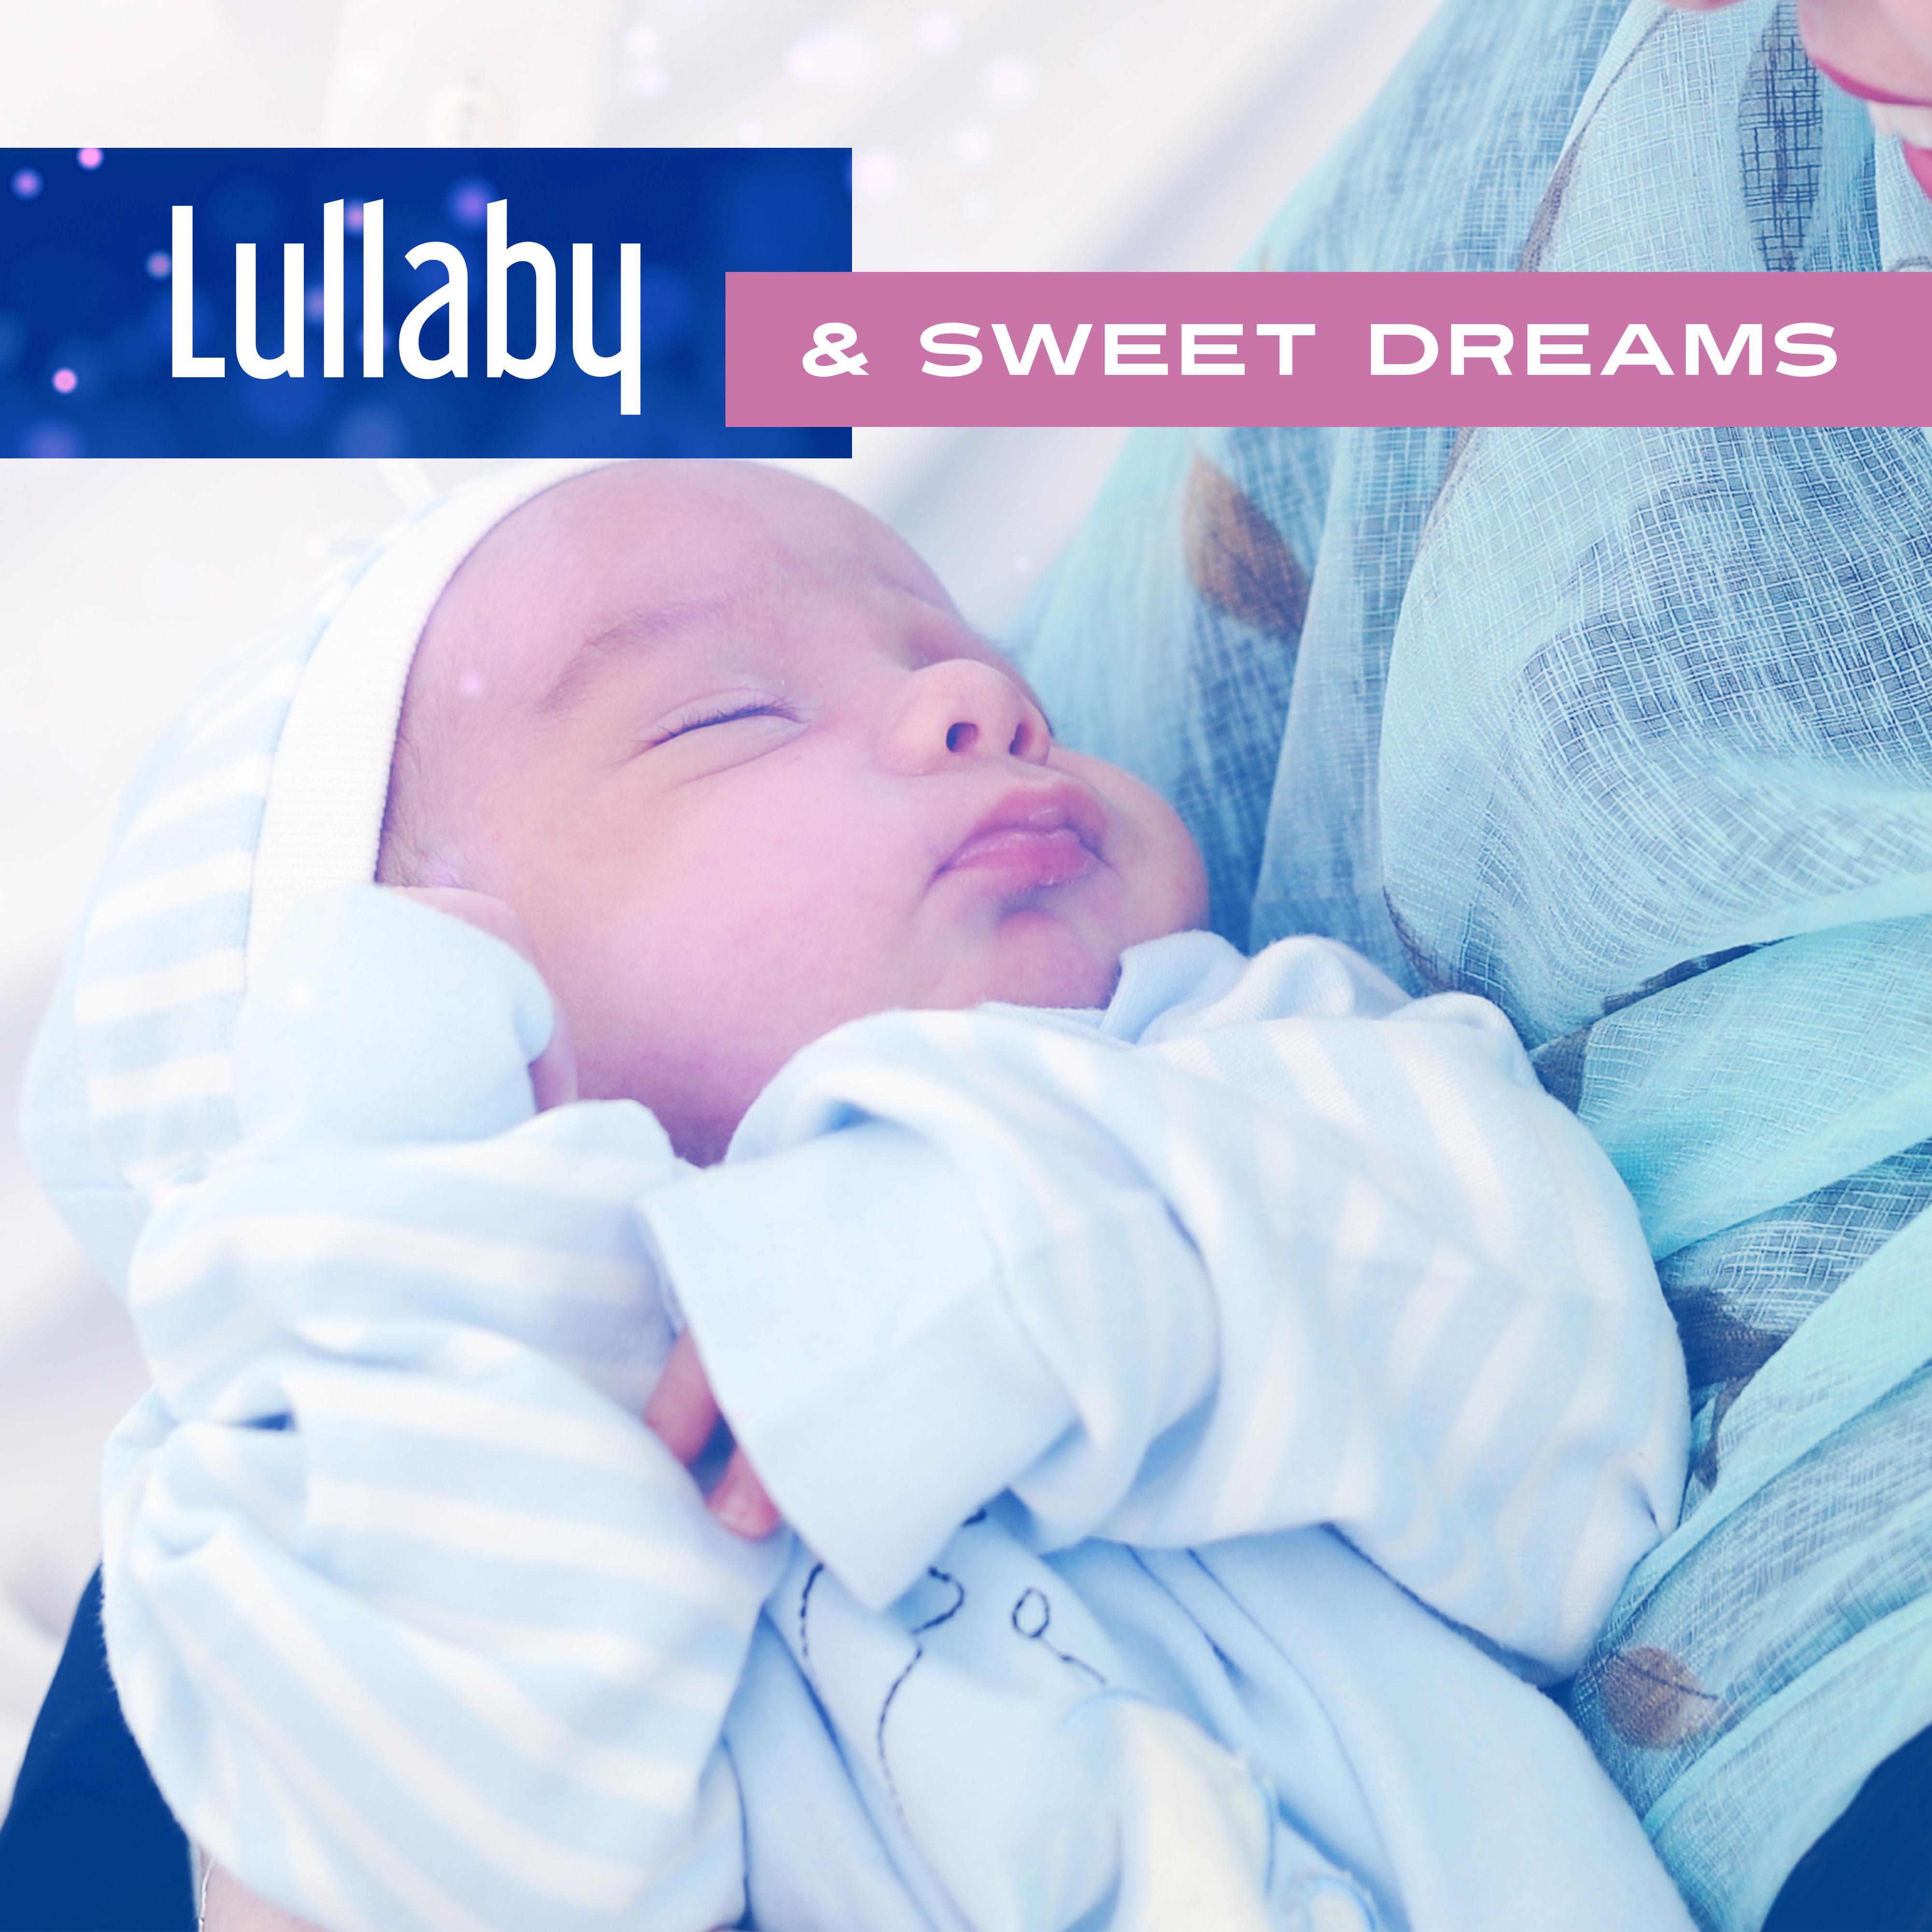 Lullaby  Sweet Dreams  Classical Music for Baby, Healing Sounds to Bed, Restful Sleep, Deep Dreams with Mozart, Beethoven, Calm Baby